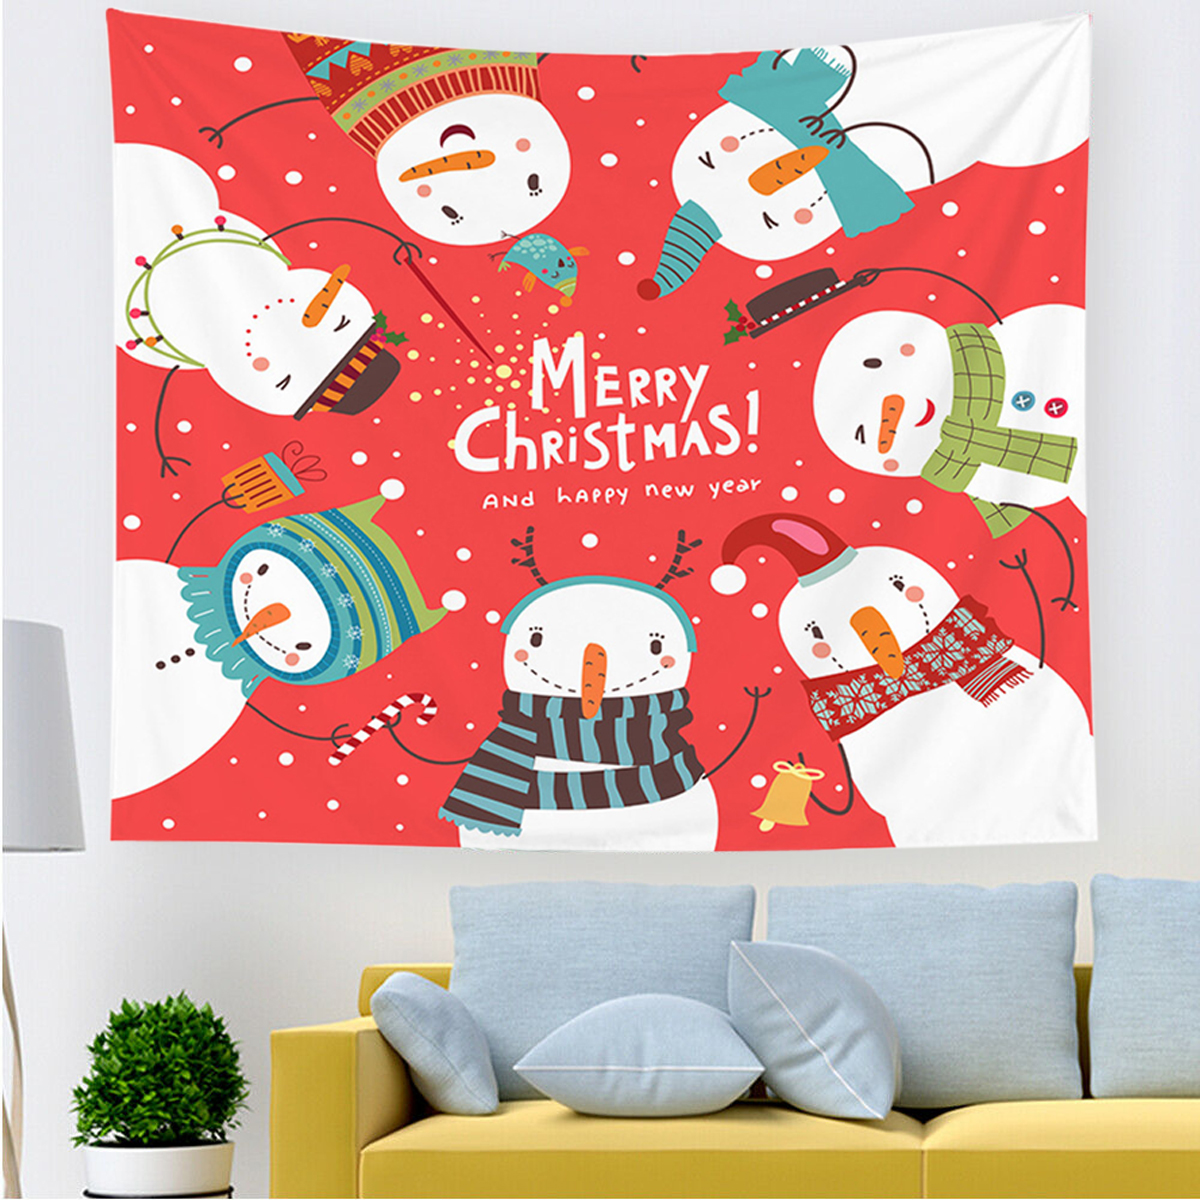 Christmas-Hanging-Cloth-Custom-Red-Santa-Claus-Bedside-Photography-Background-Cloth-Wall-Bedside-Dec-1749899-5